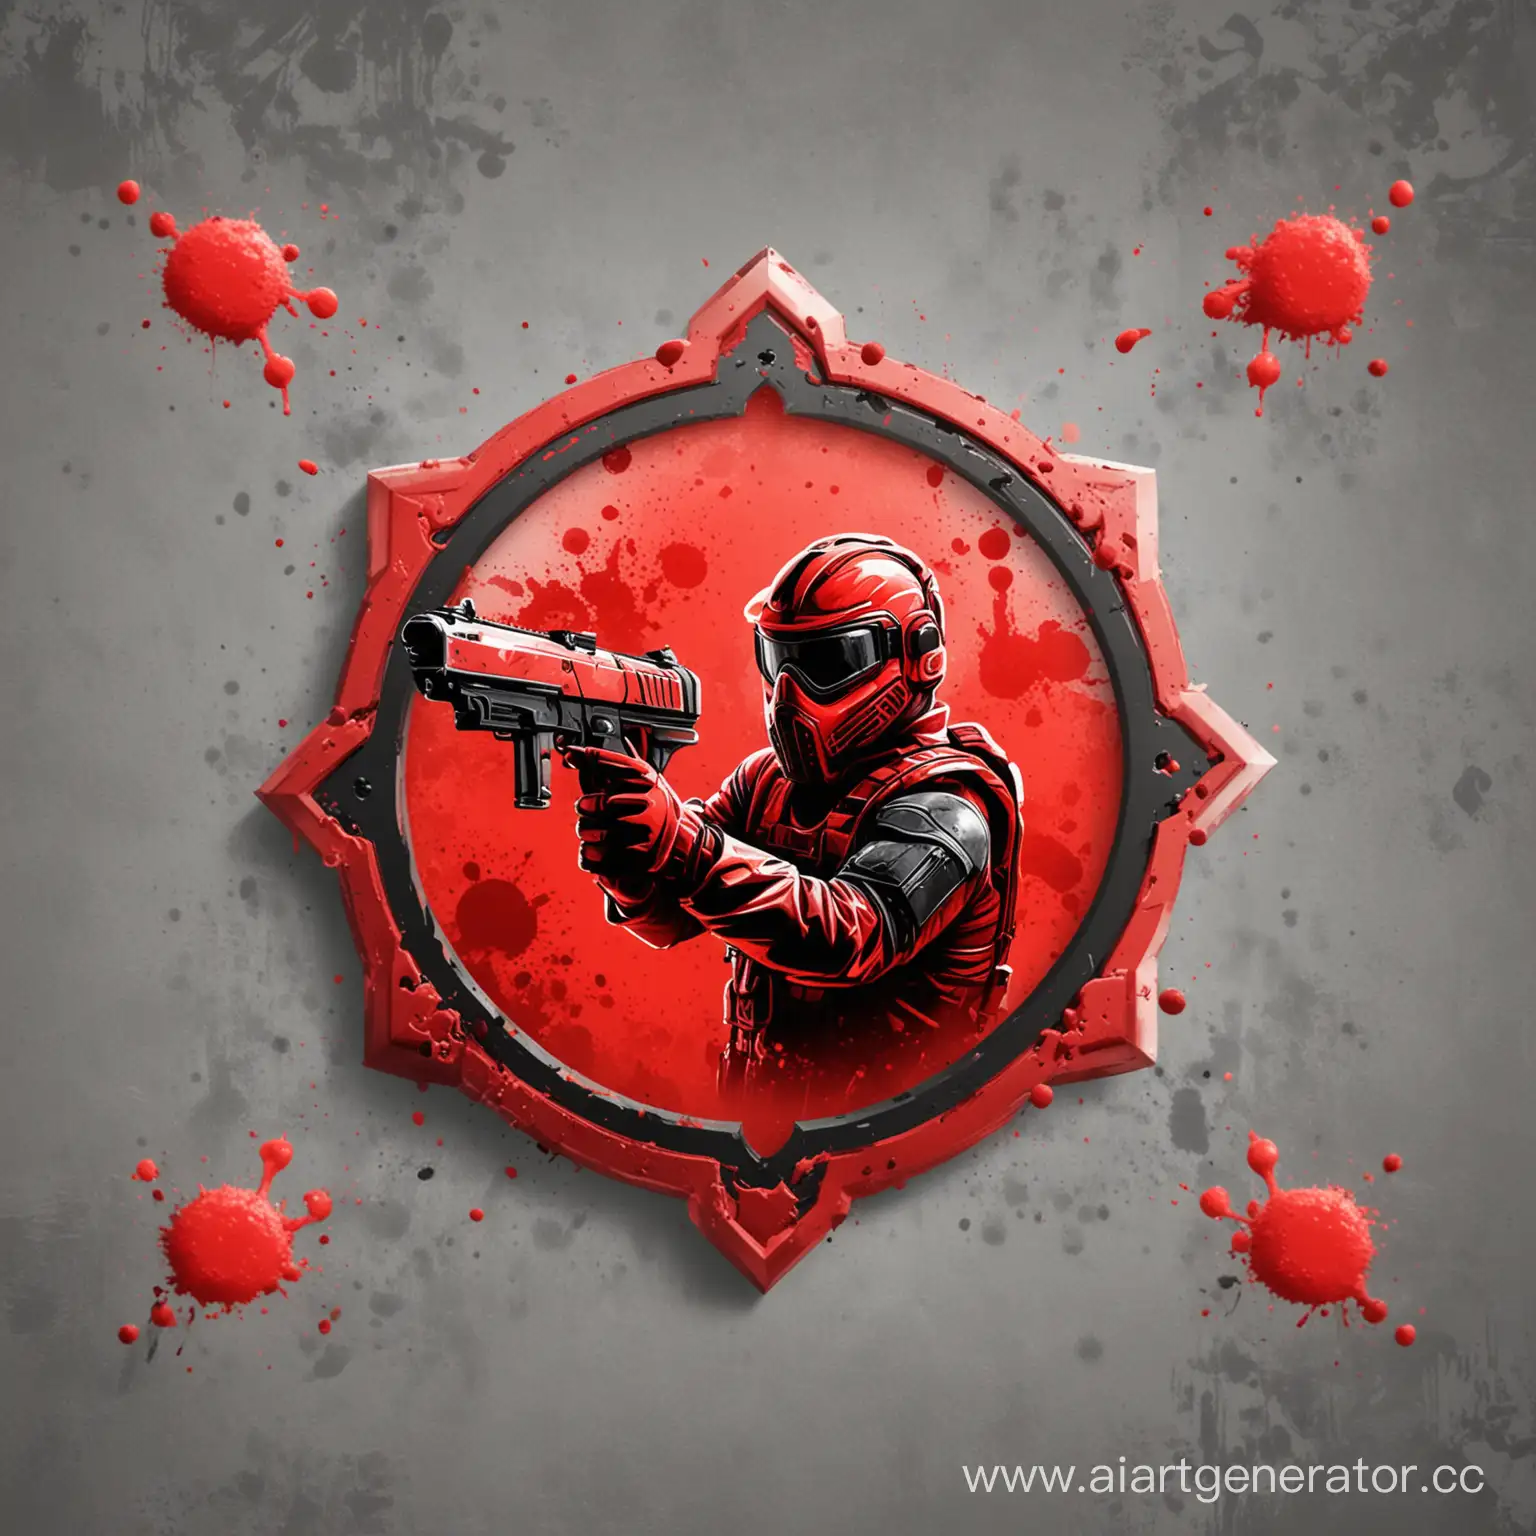 Intense-Paintball-Battle-Defend-and-Destroy-Key-Objects-with-Red-Accents